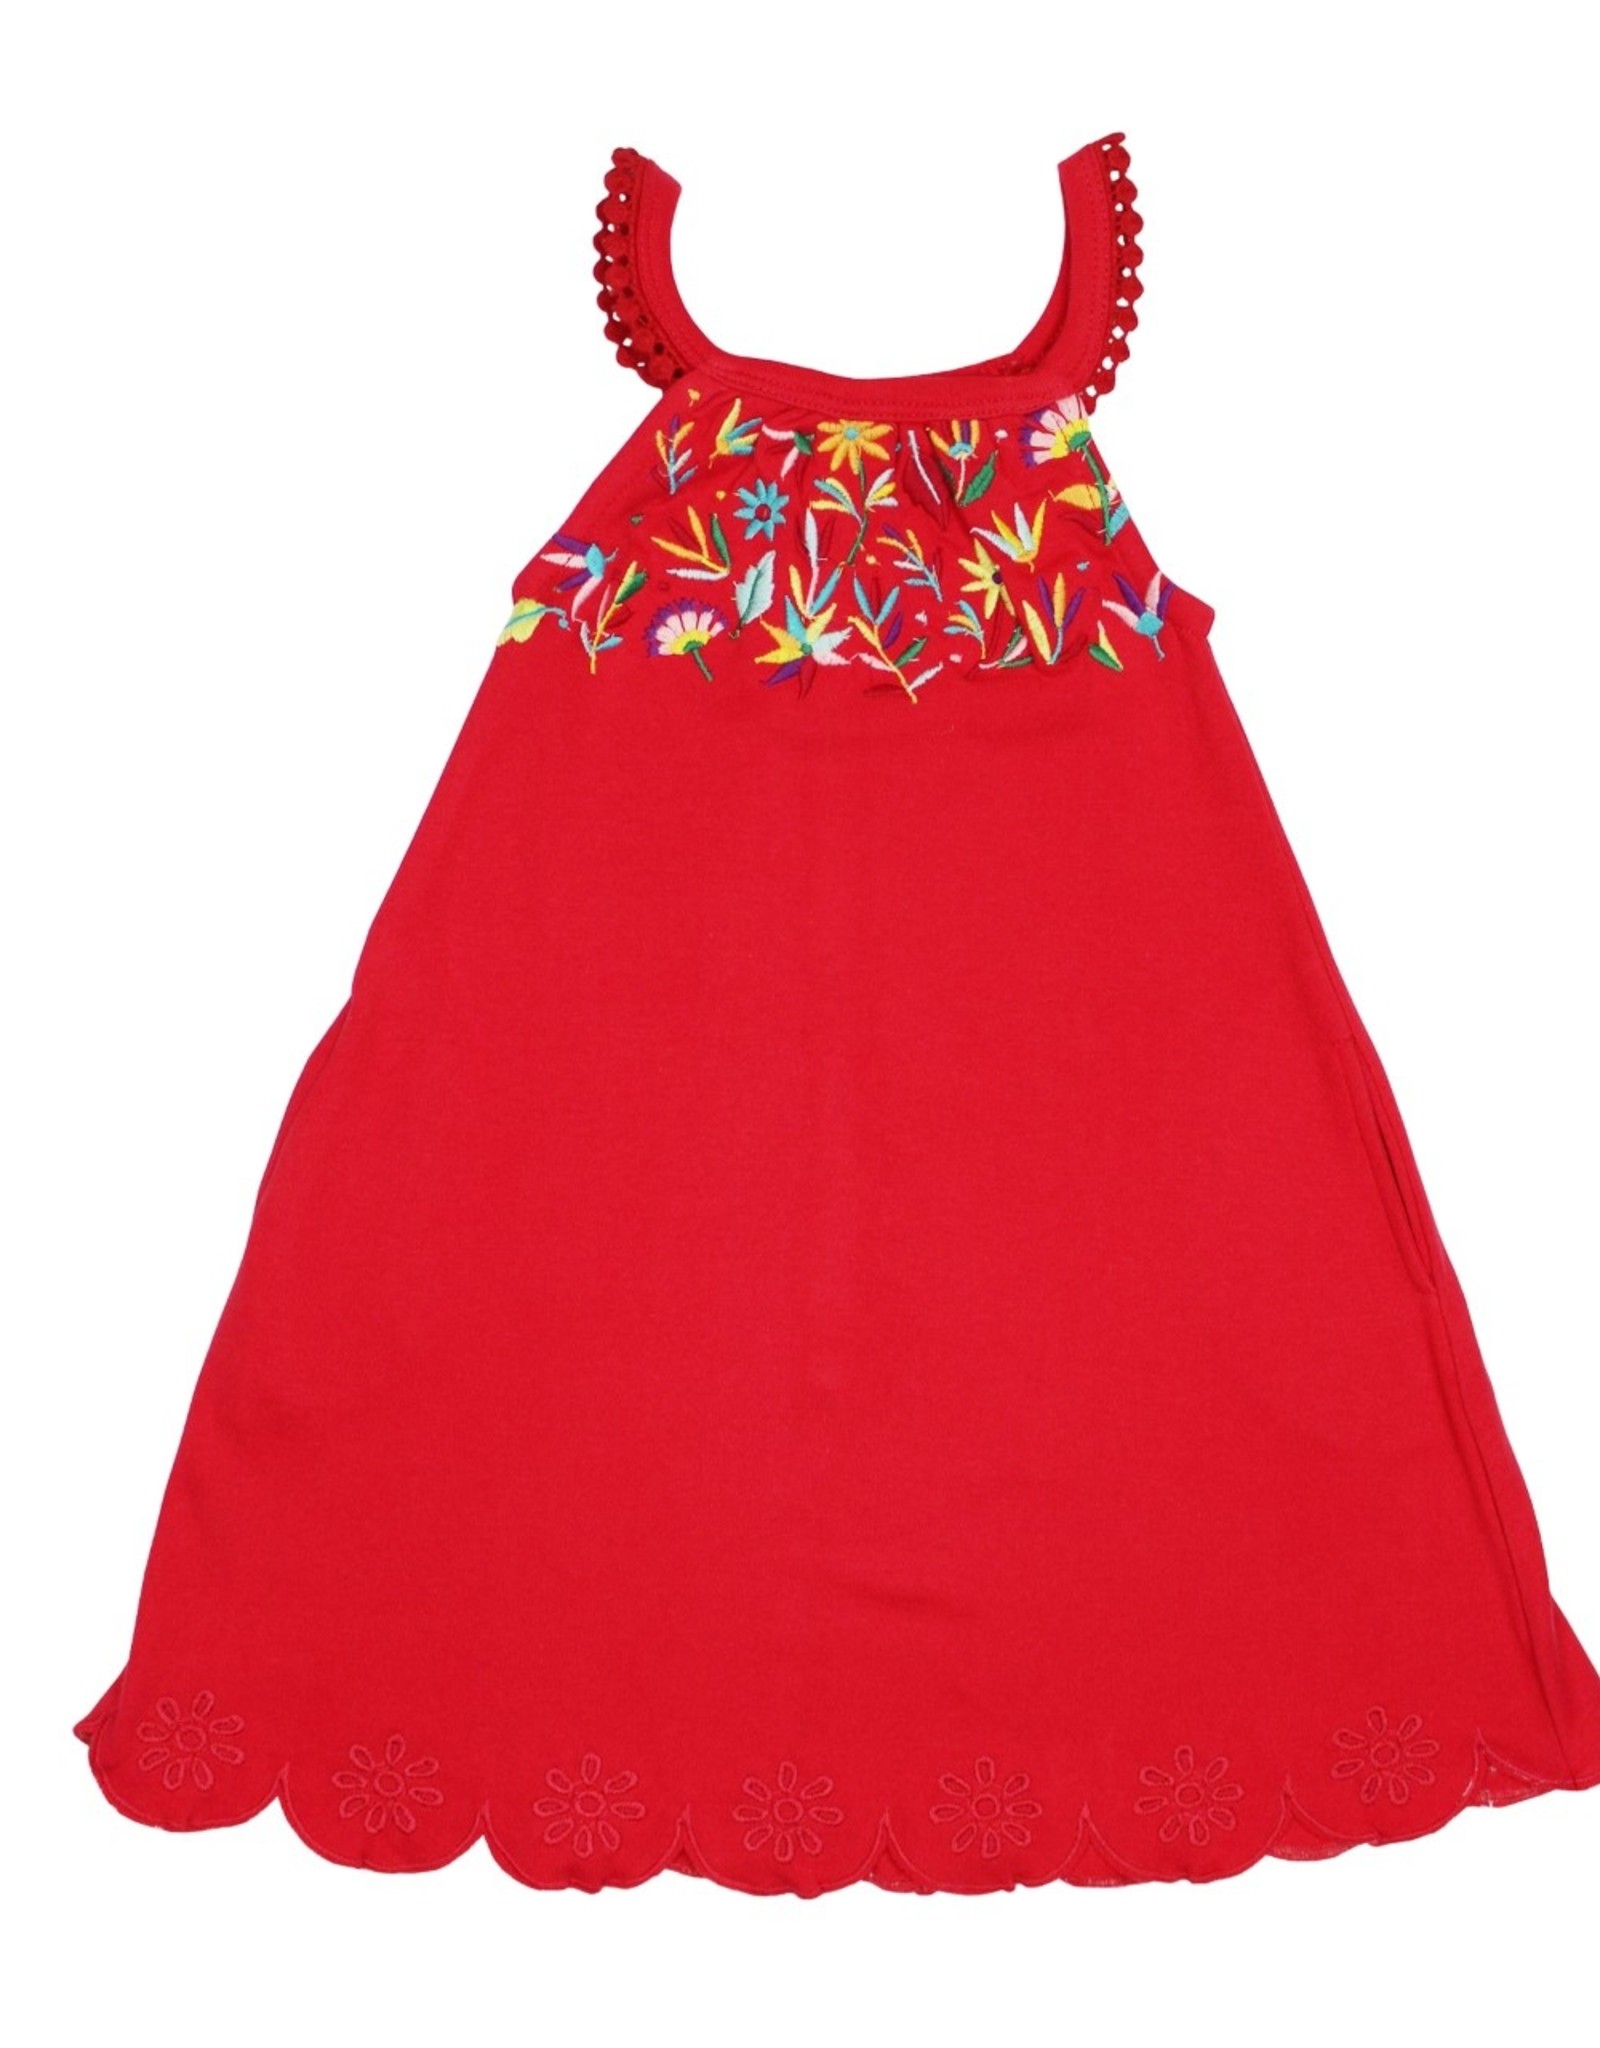 L'oved Baby Kids' Embroidered Twirl Dress Chili Pepper Red Floral